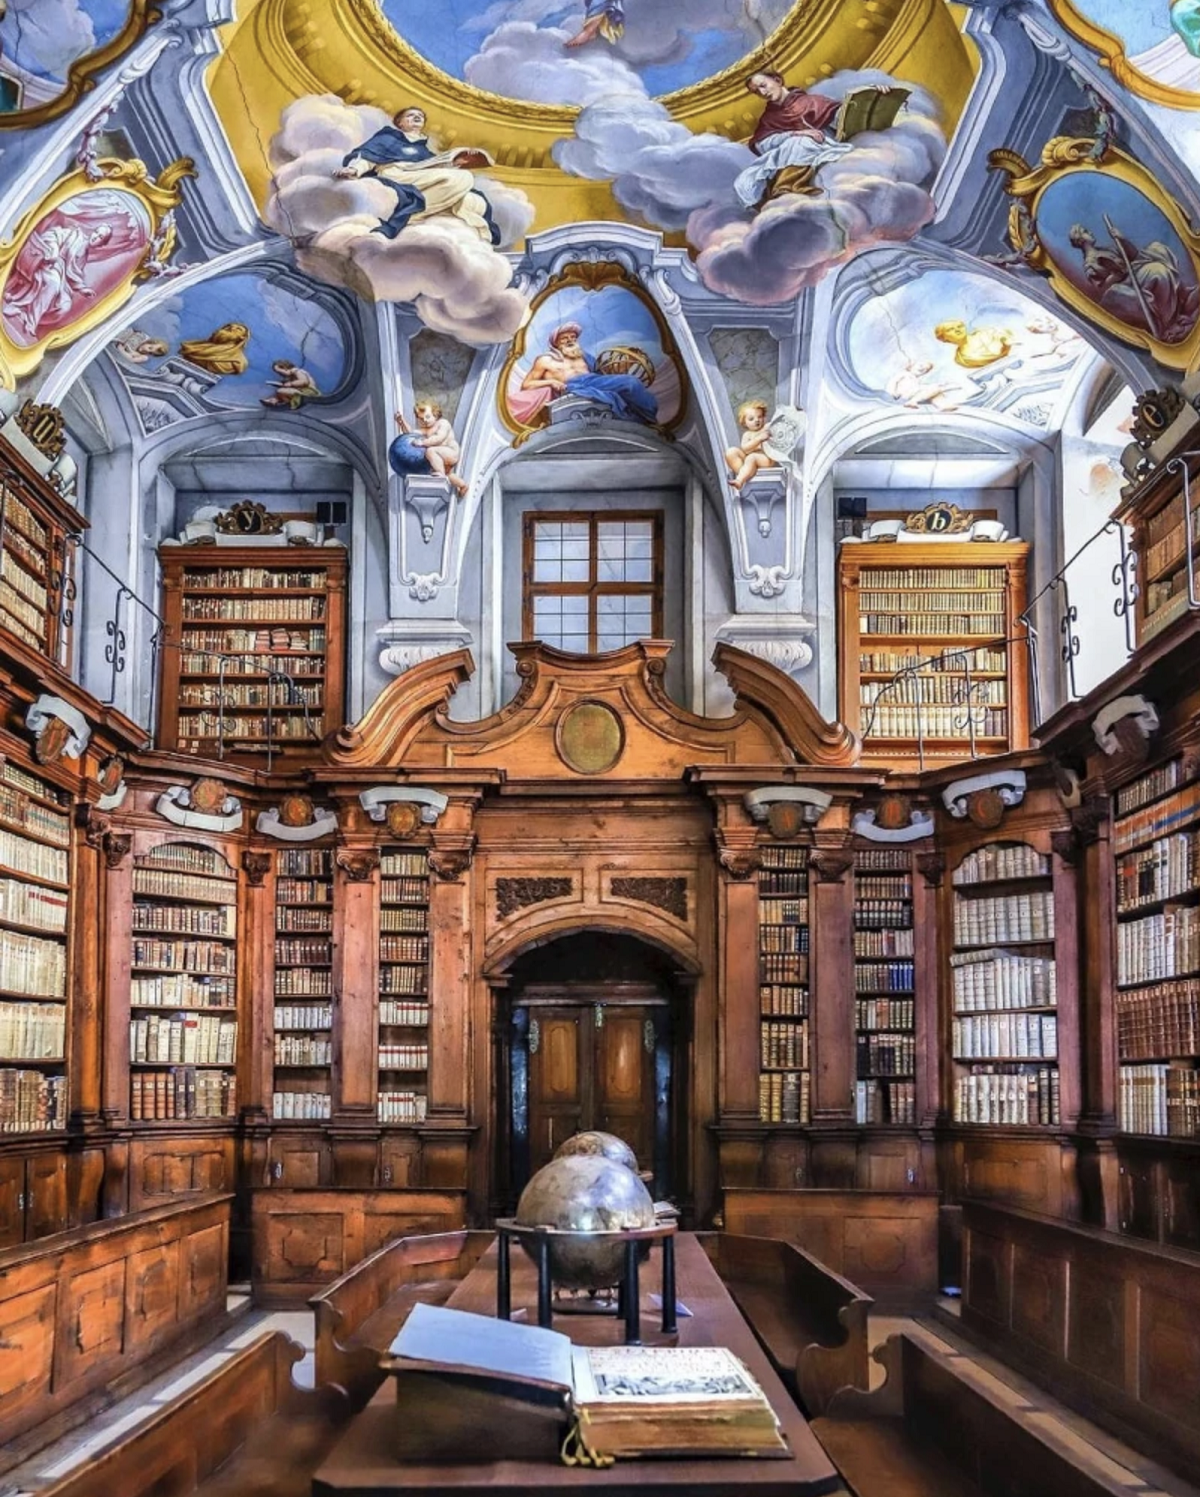 A large library with wooden book shelves. A blue painted ceiling with angels.